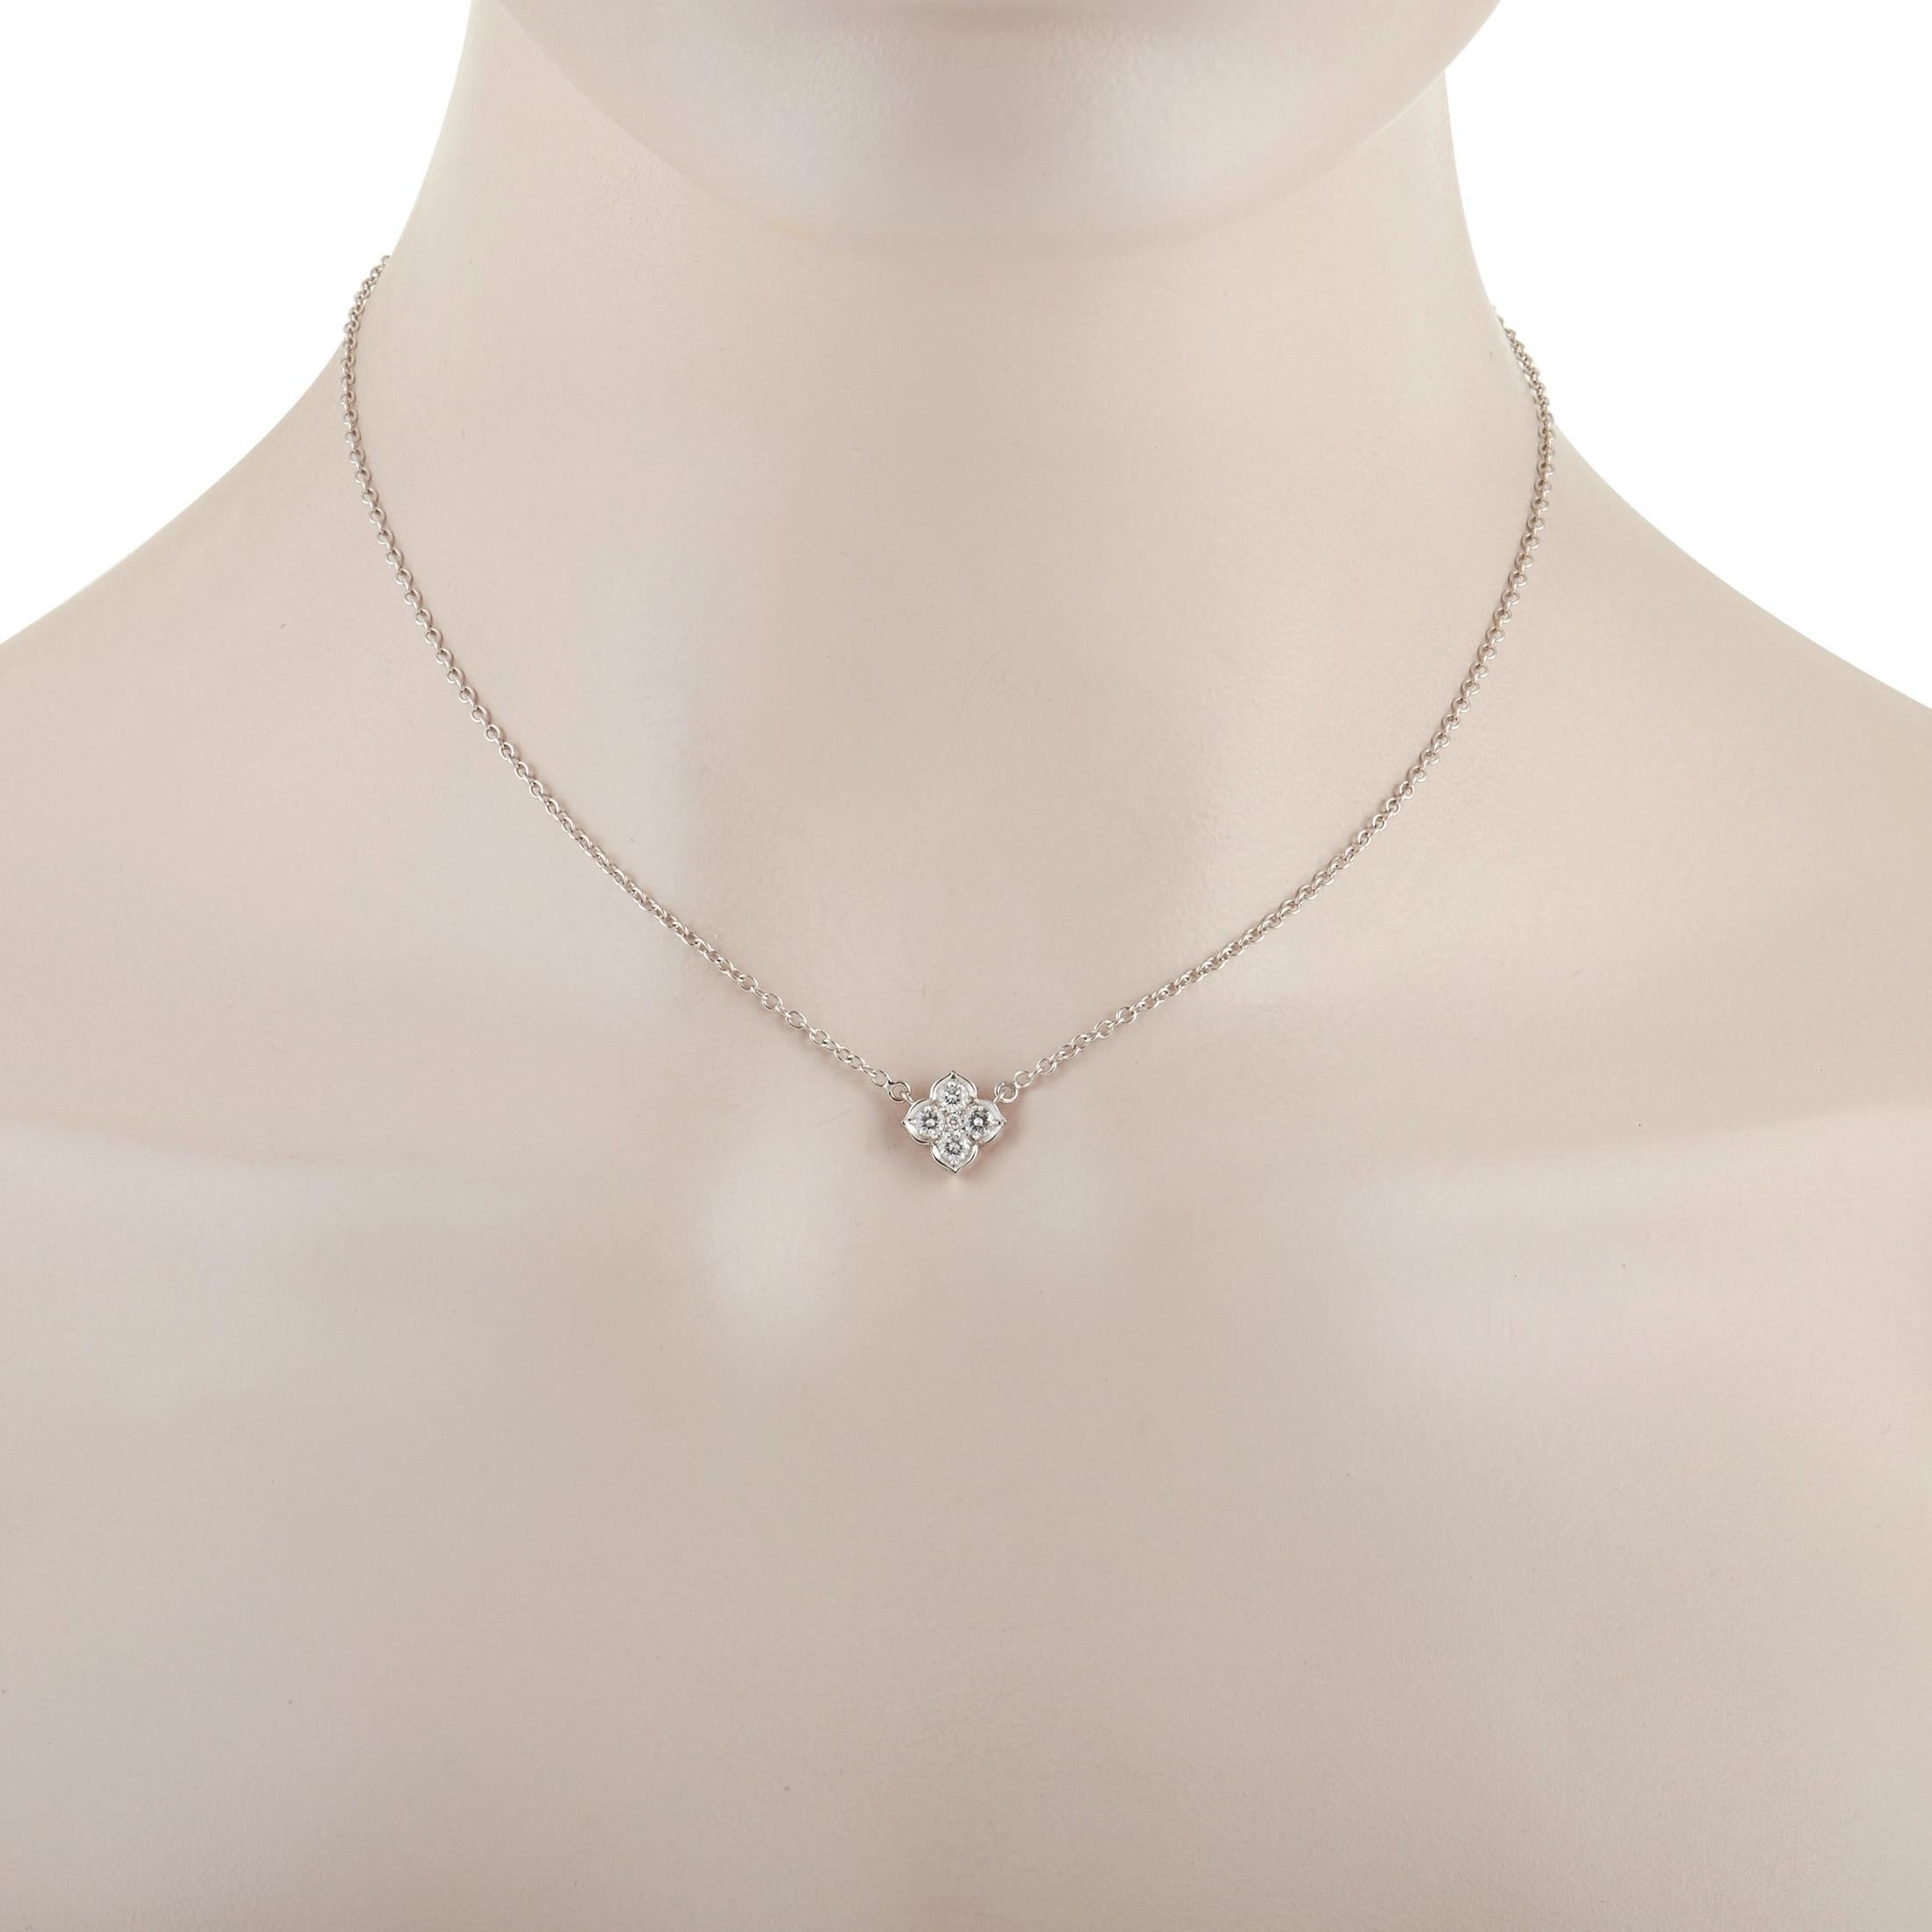 This Cartier Hindu necklace is simply elegant. A dainty pendant measuring 0.38” round comes to life thanks to four glittering diamonds with a total weight of 0.35 carats. Set within 18K white gold, it is suspended upon a 15” chain with spring ring